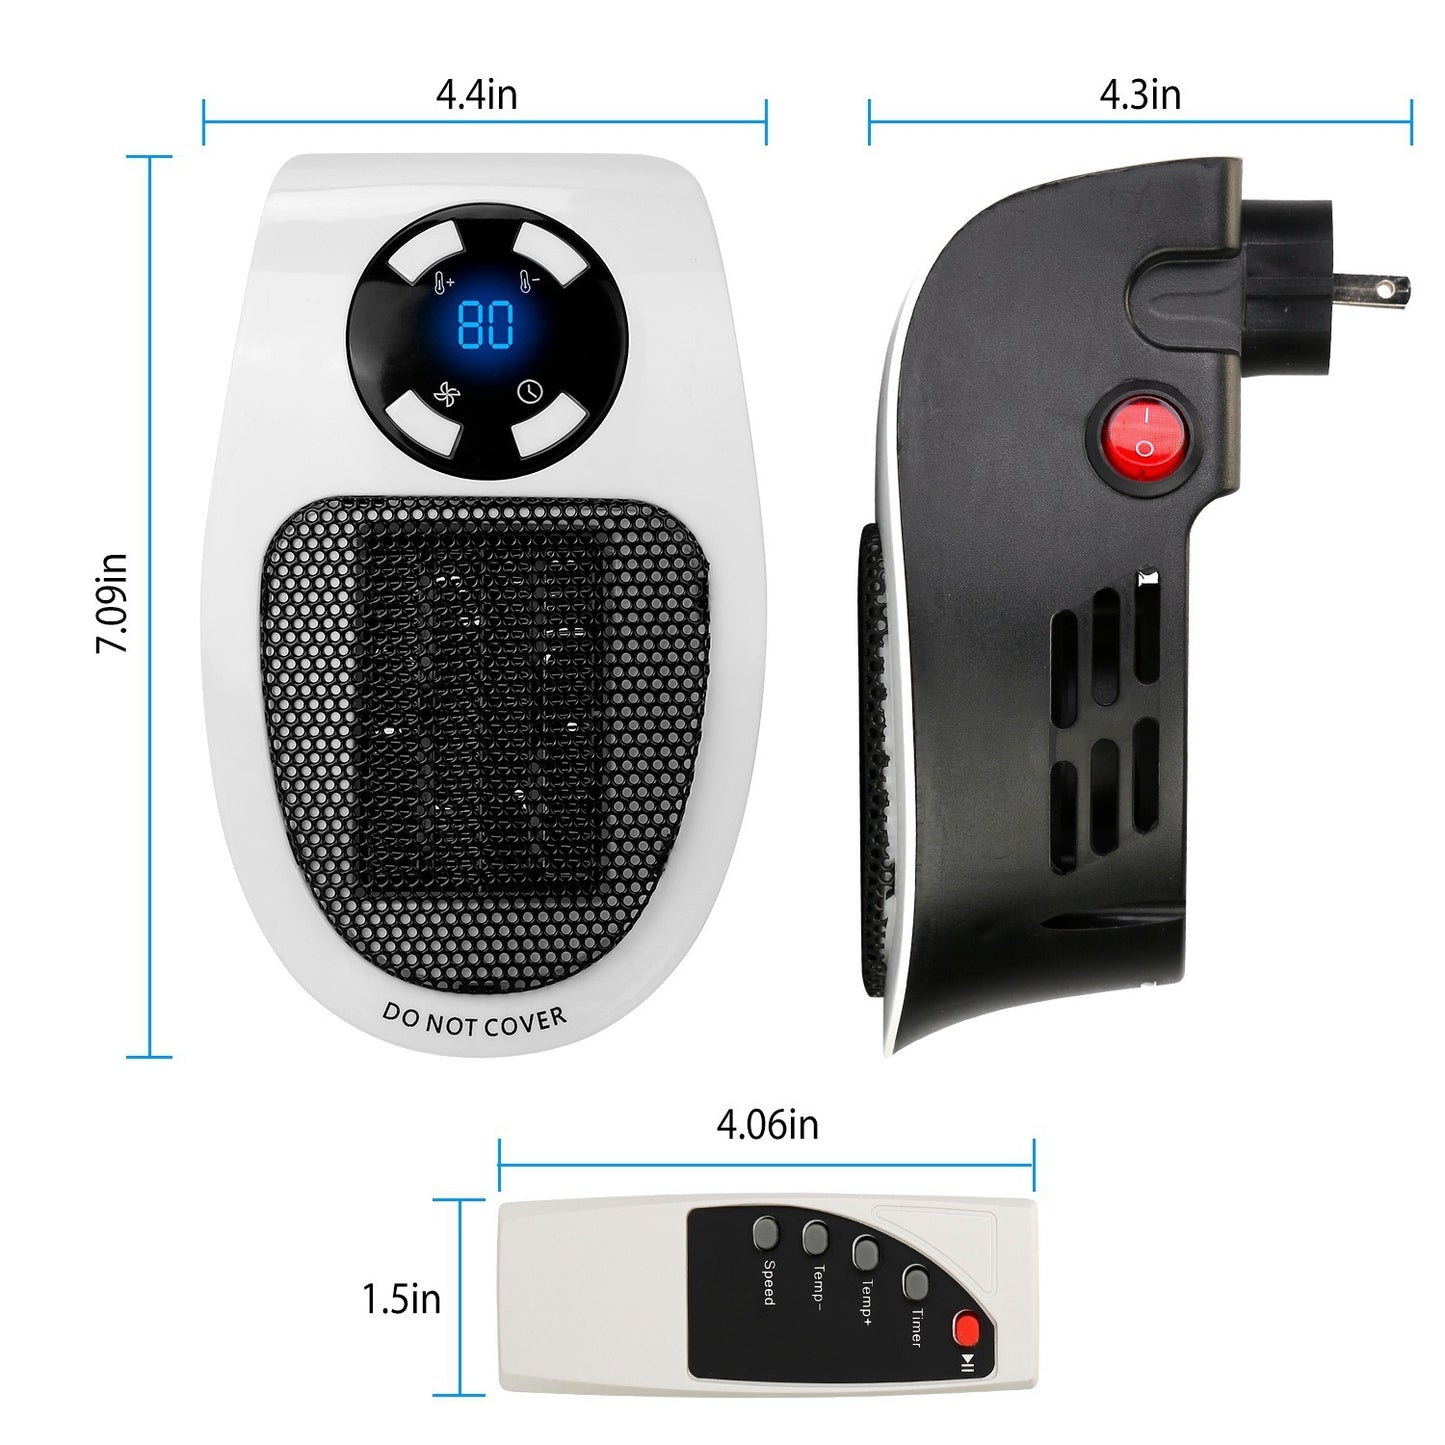 500W Portable Heater Fan Wall Outlet Space Heater Plug-in Heater Adjustable Temperature Auto Shut off w/ Remote Control